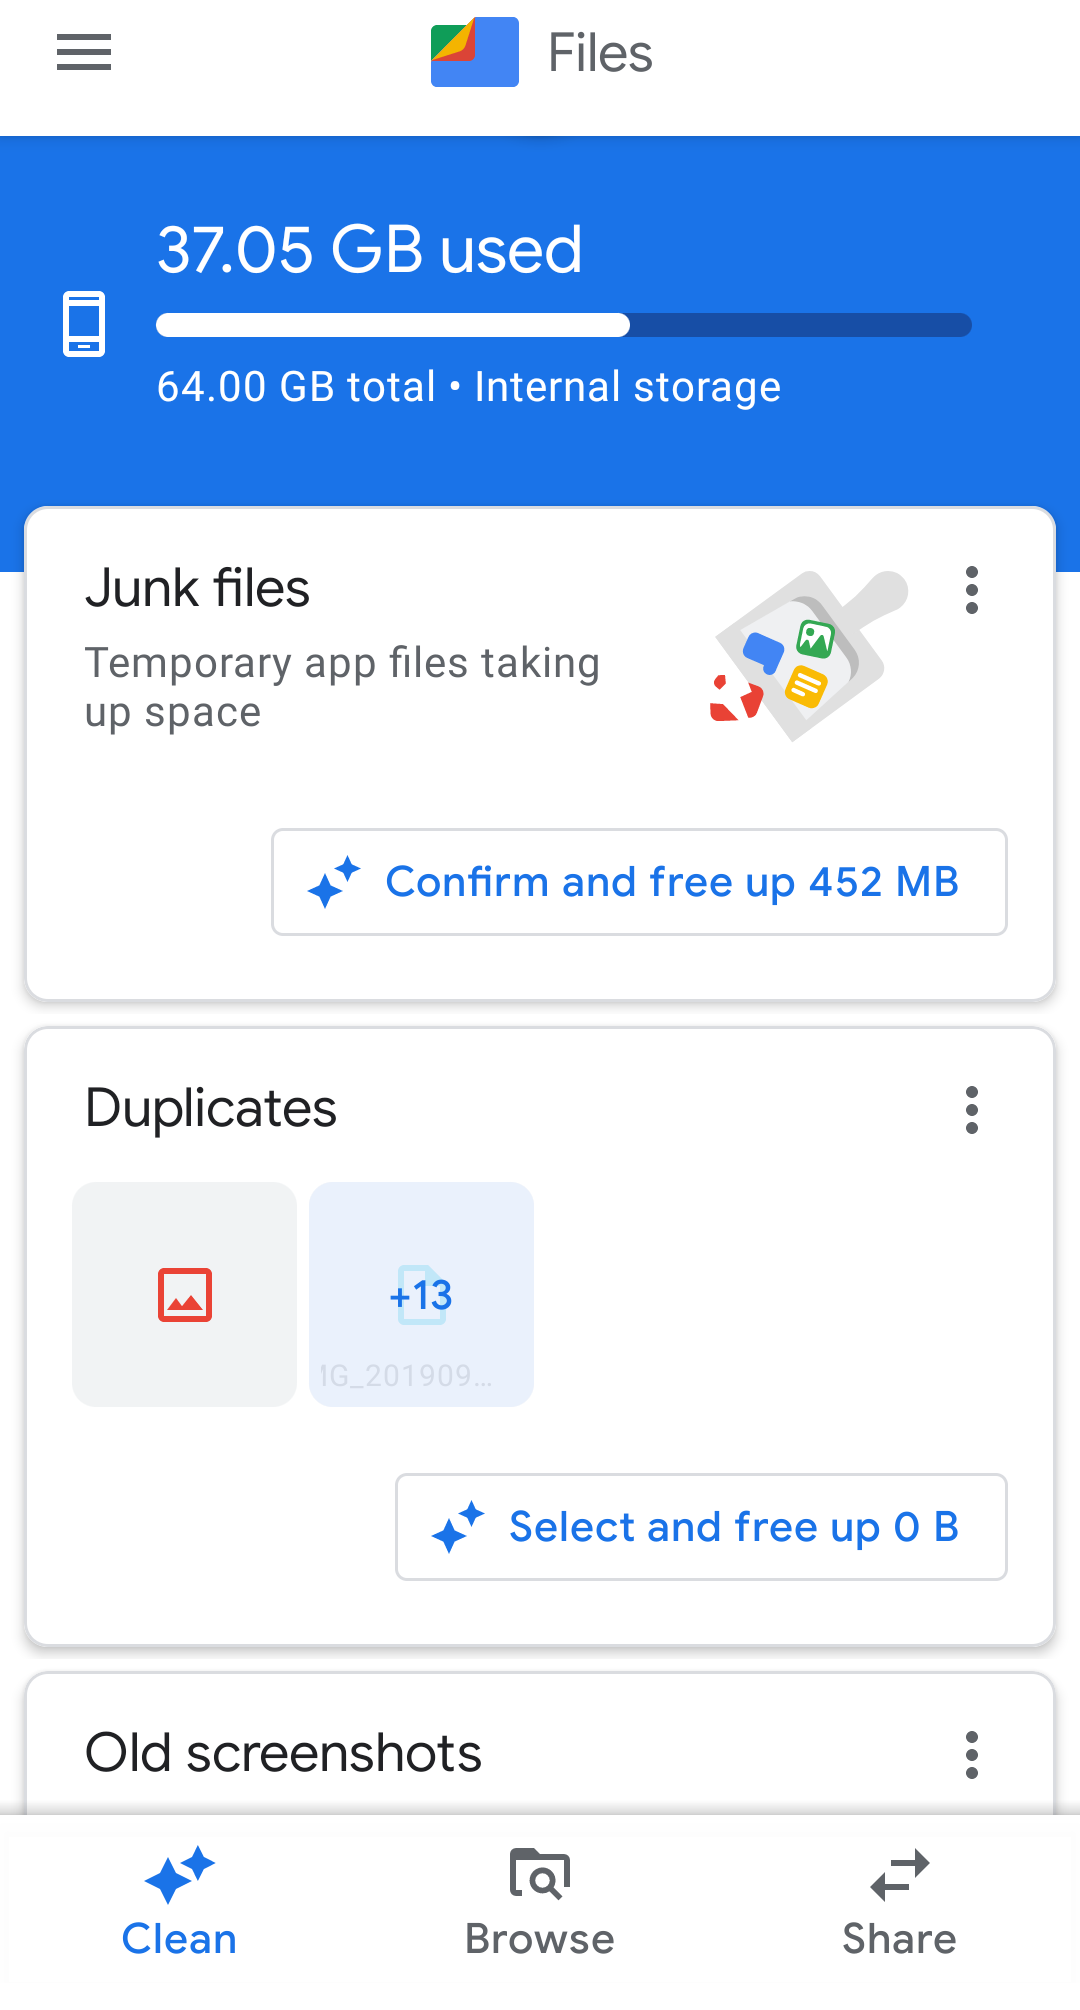 Files by Google Junk Files